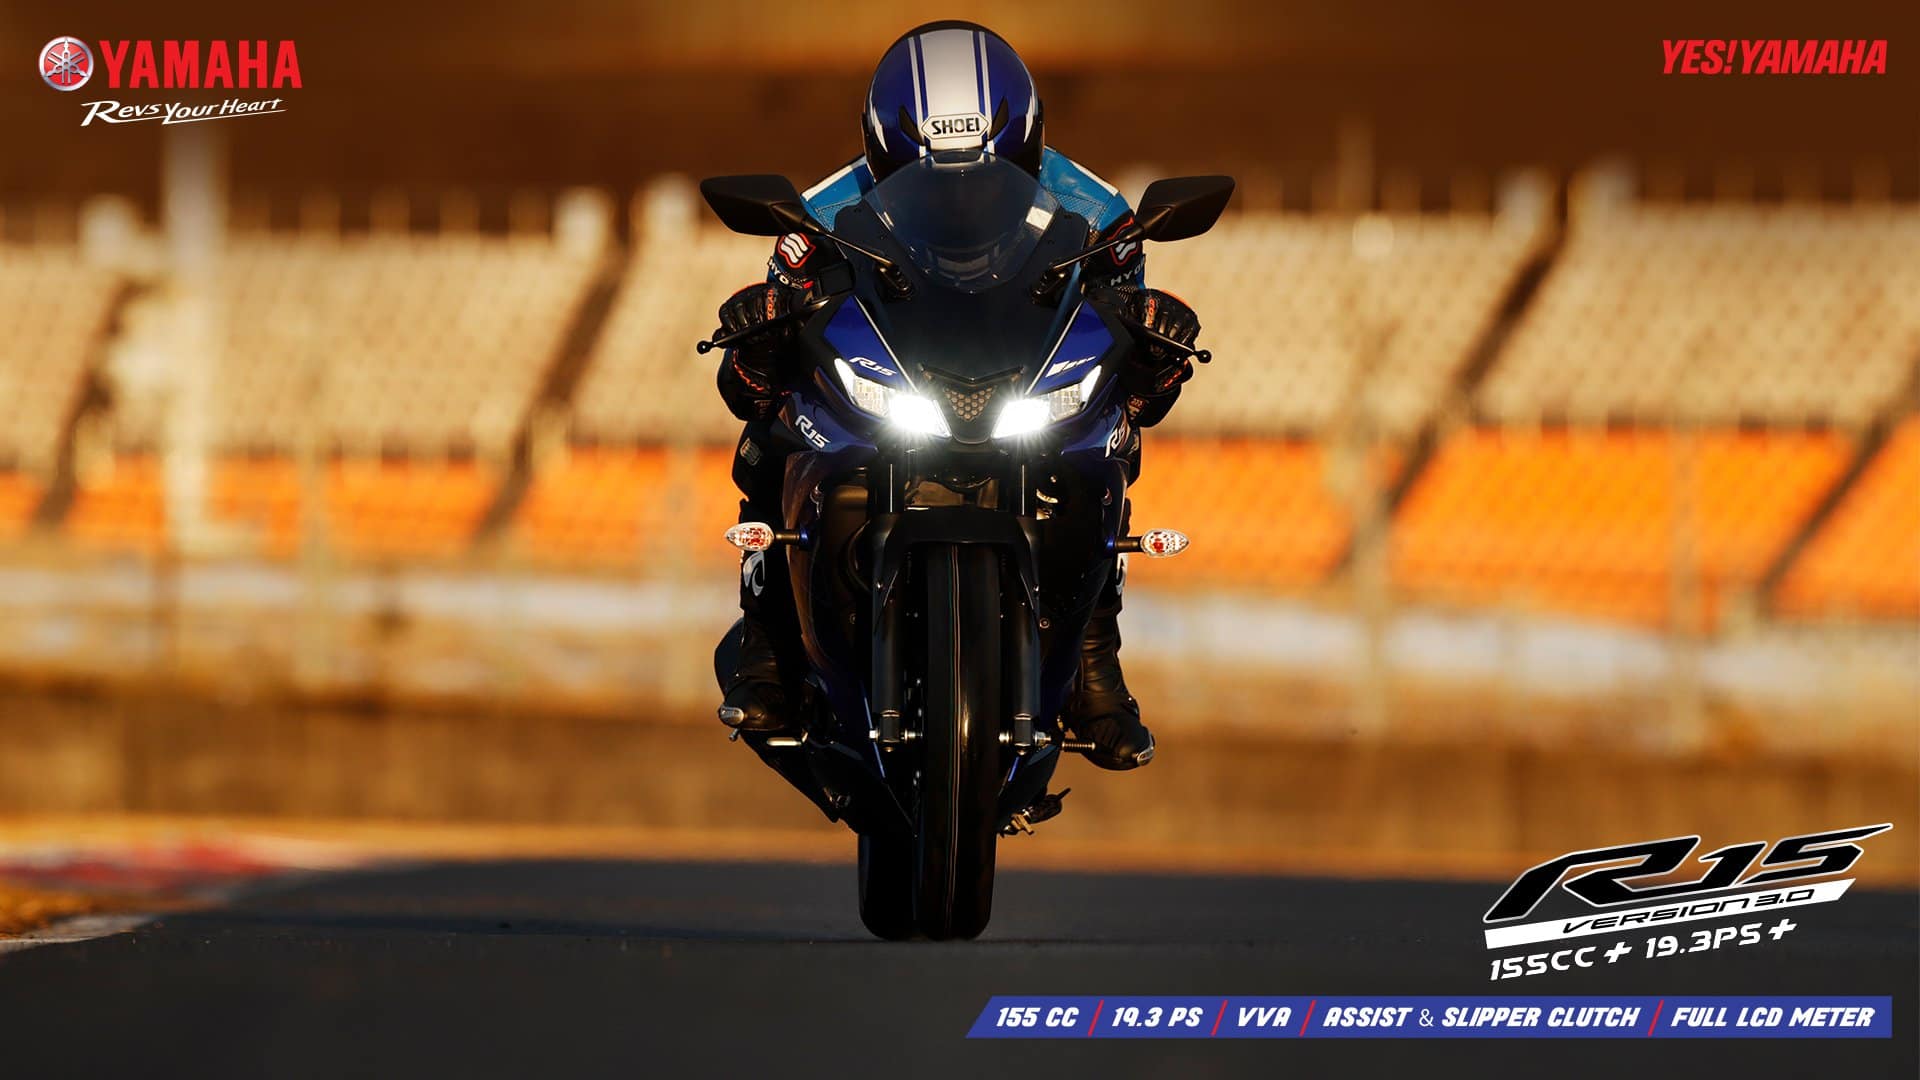 Yamaha R15 V3.0 MotoGP edition launch in August